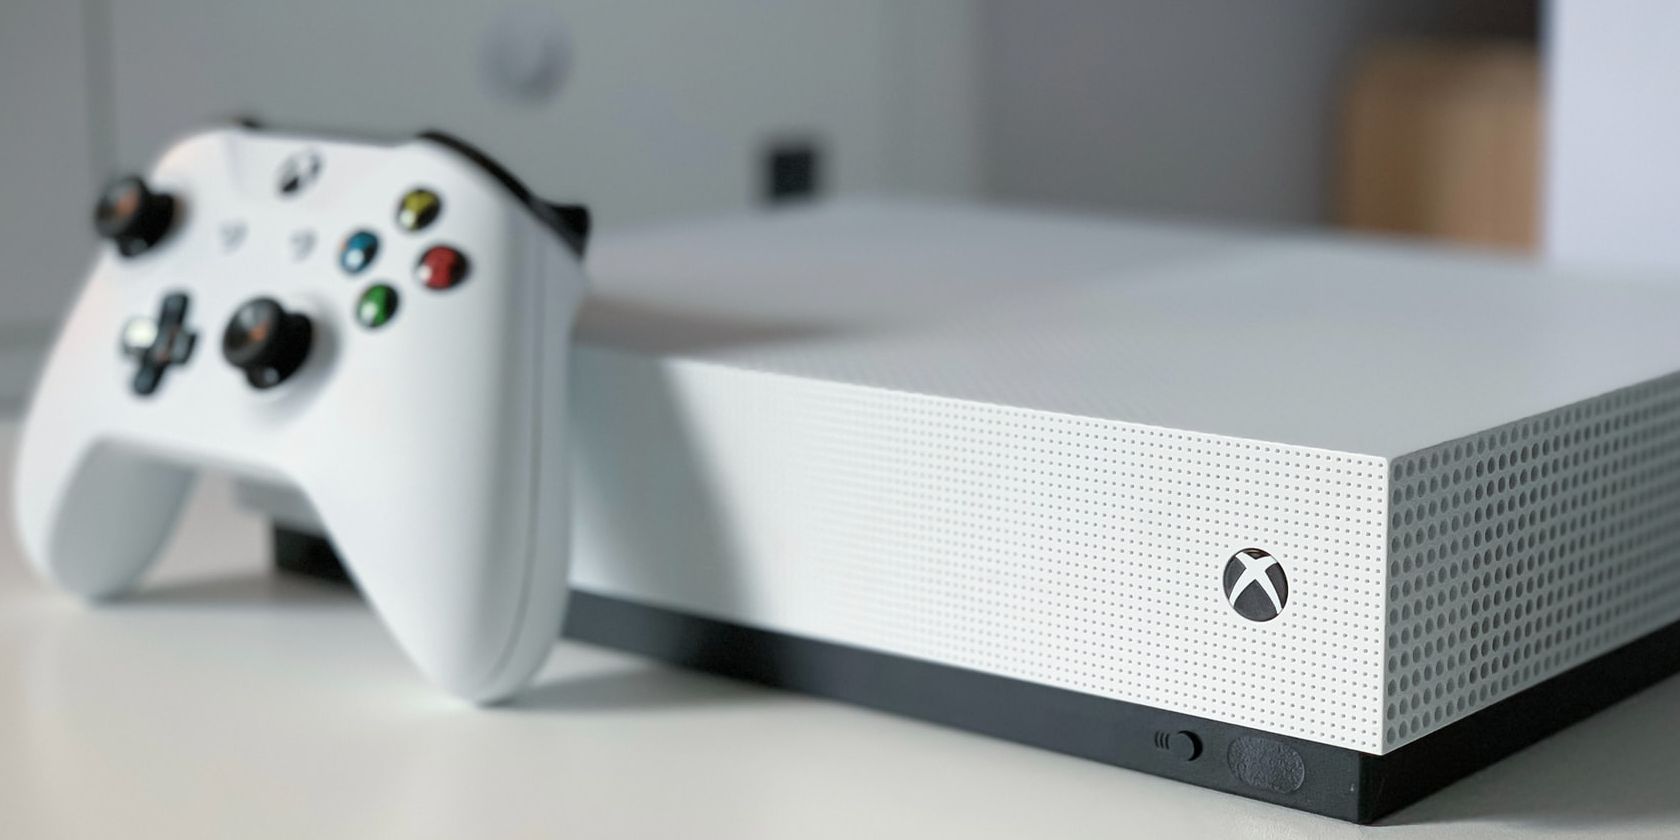 5 reasons why you should buy the Xbox One S All-Digital